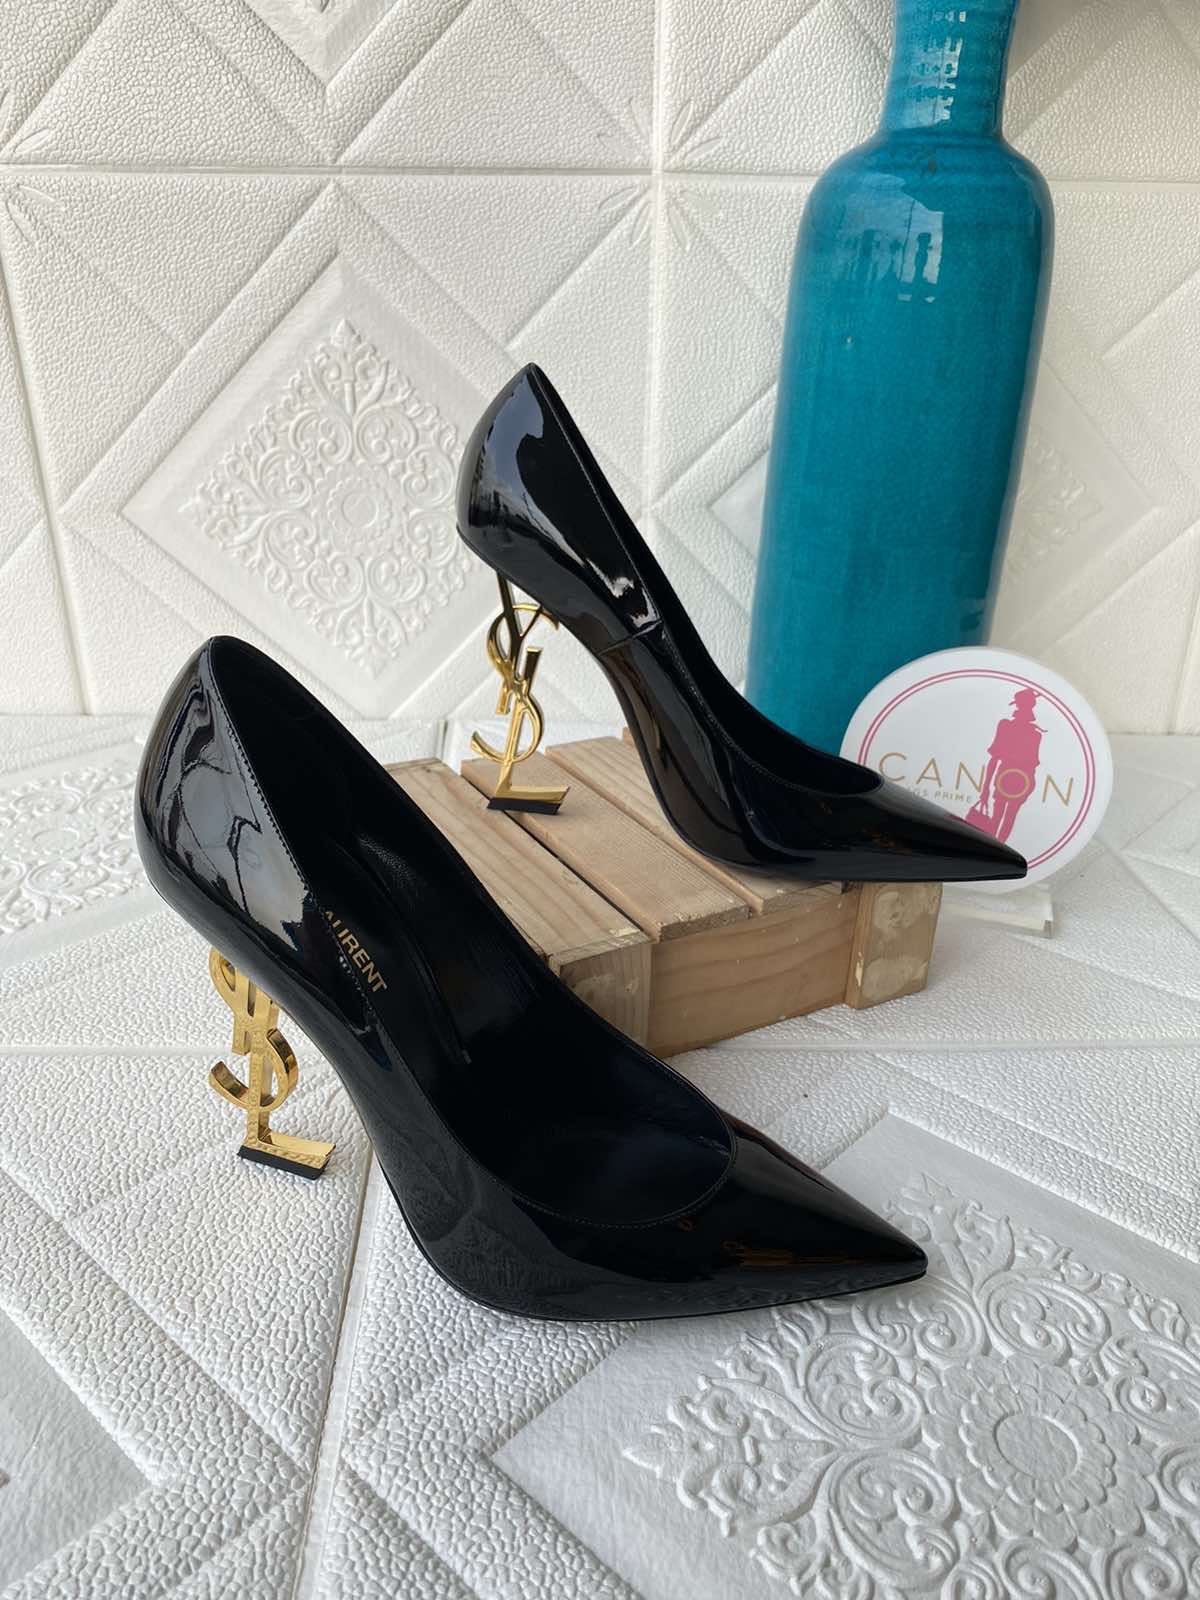 Saint Laurent Opyum Black Patent YSL Heels Size 39. Made in Italy